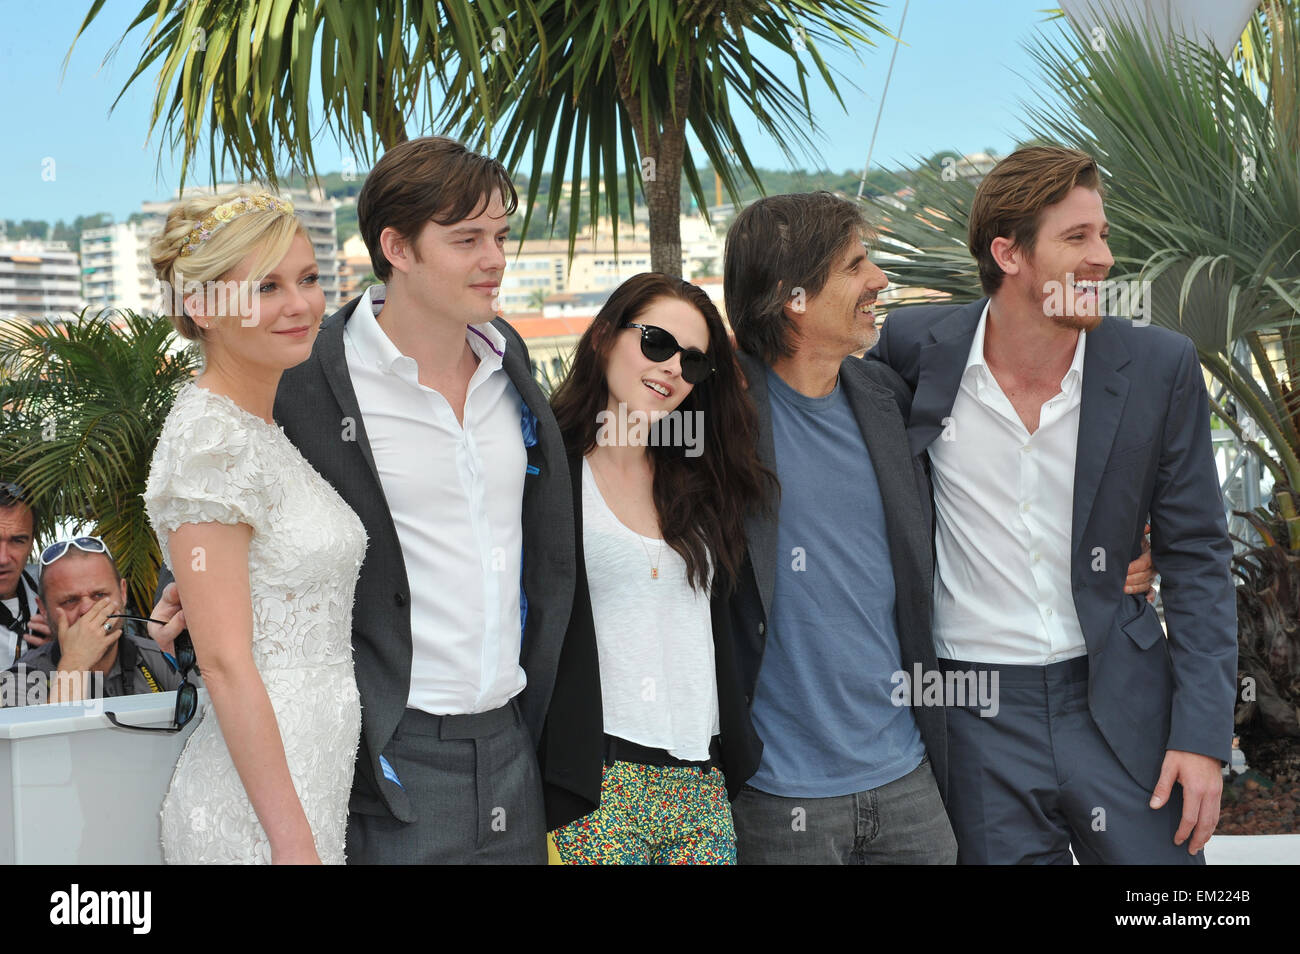 CANNES, FRANCE - MAY 23, 2012: Kirsten Dunst, Sam Riley, Kristen Stewart, director Walter Salles & Garret Hedlund at the photocall for their new movie 'On The Road' in Cannes. May 23, 2012 Cannes, France Stock Photo